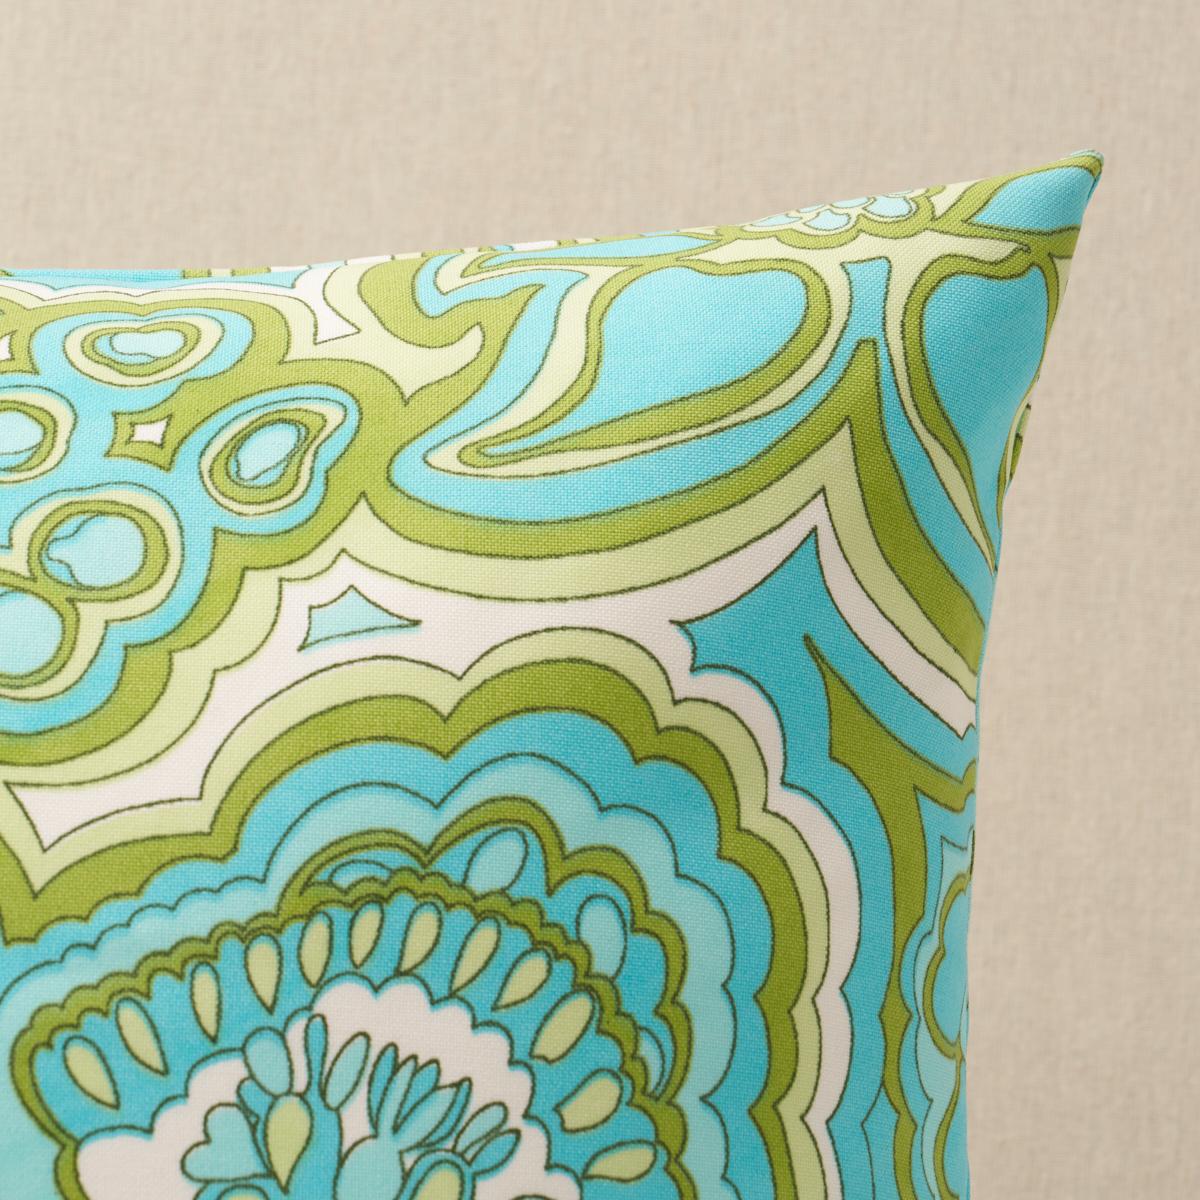 This pillow features Morning Sunrise Indoor/Outdoor by Trina Turk with a knife edge finish. Created by Trina Turk, Morning Sunrise Print Indoor/Outdoor fabric is a fashion-inspired abstract floral with a groovy retro vibe. Pillow includes a polyfill